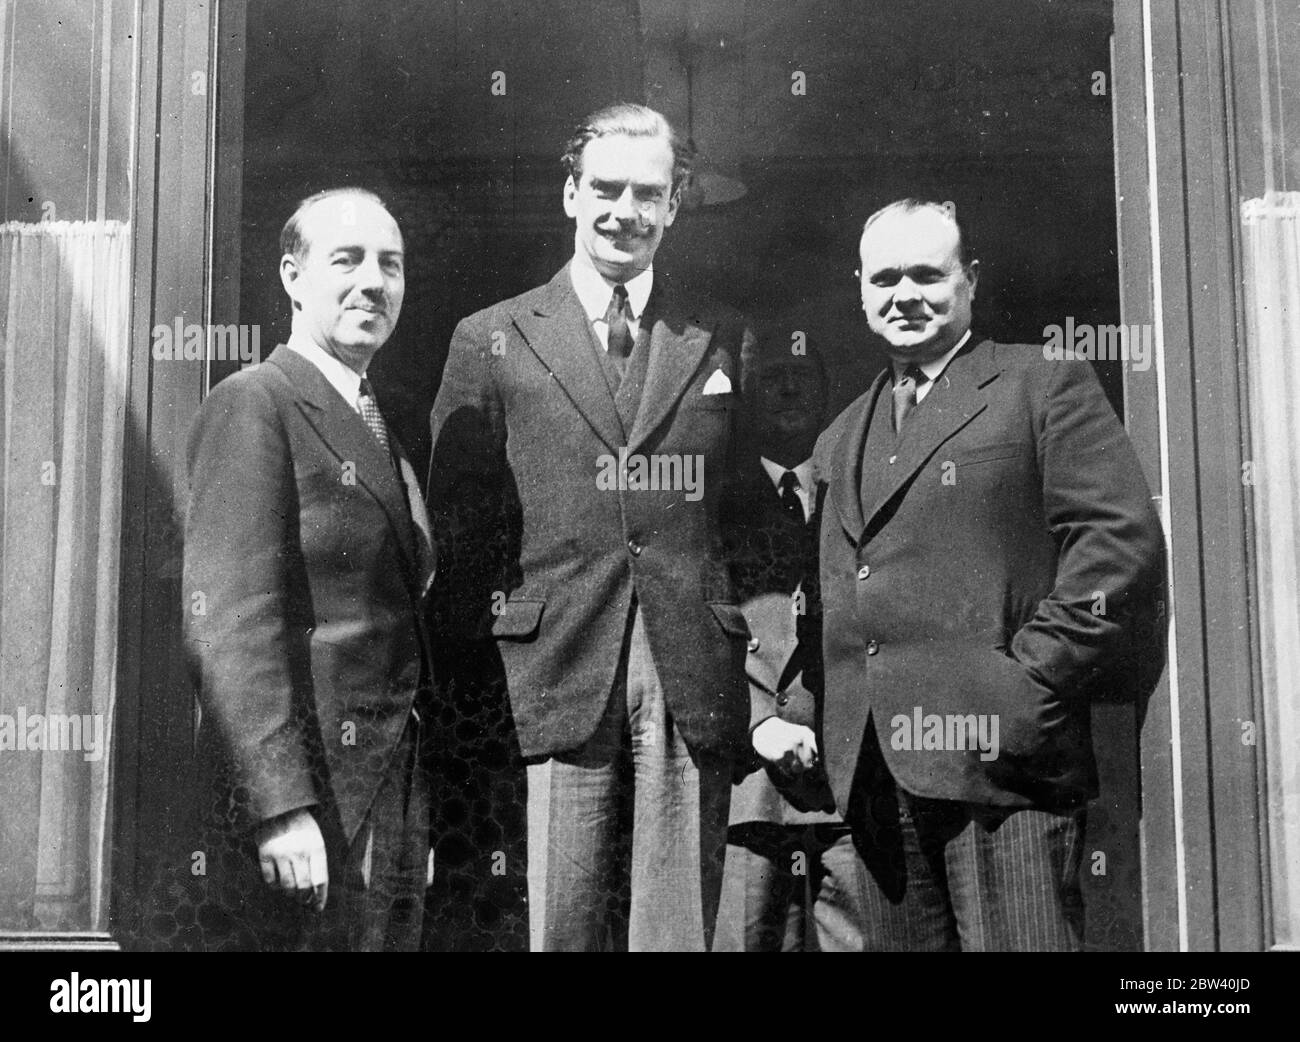 Mr Eden has talks with Belgian Premier and foreign Minister in Brussels. Mr Anthony Eden, the British Foreign Minister, is having discussions in Brussels with M. Paul van Zeeland, the Belgian Premier, and M. Spaak, the Foreign Minister. The talks follow Belgium's new agreement with Britain and France which releases Belgium from her military obligations under the Locarno Treaty. Photo shows: Mr Anthony Eden with Premier van Zeeland (left) and M. Spaak, Belgian Foreign Minister, by the Prime Minister's office in Brussels. 26 April 1937 Stock Photo